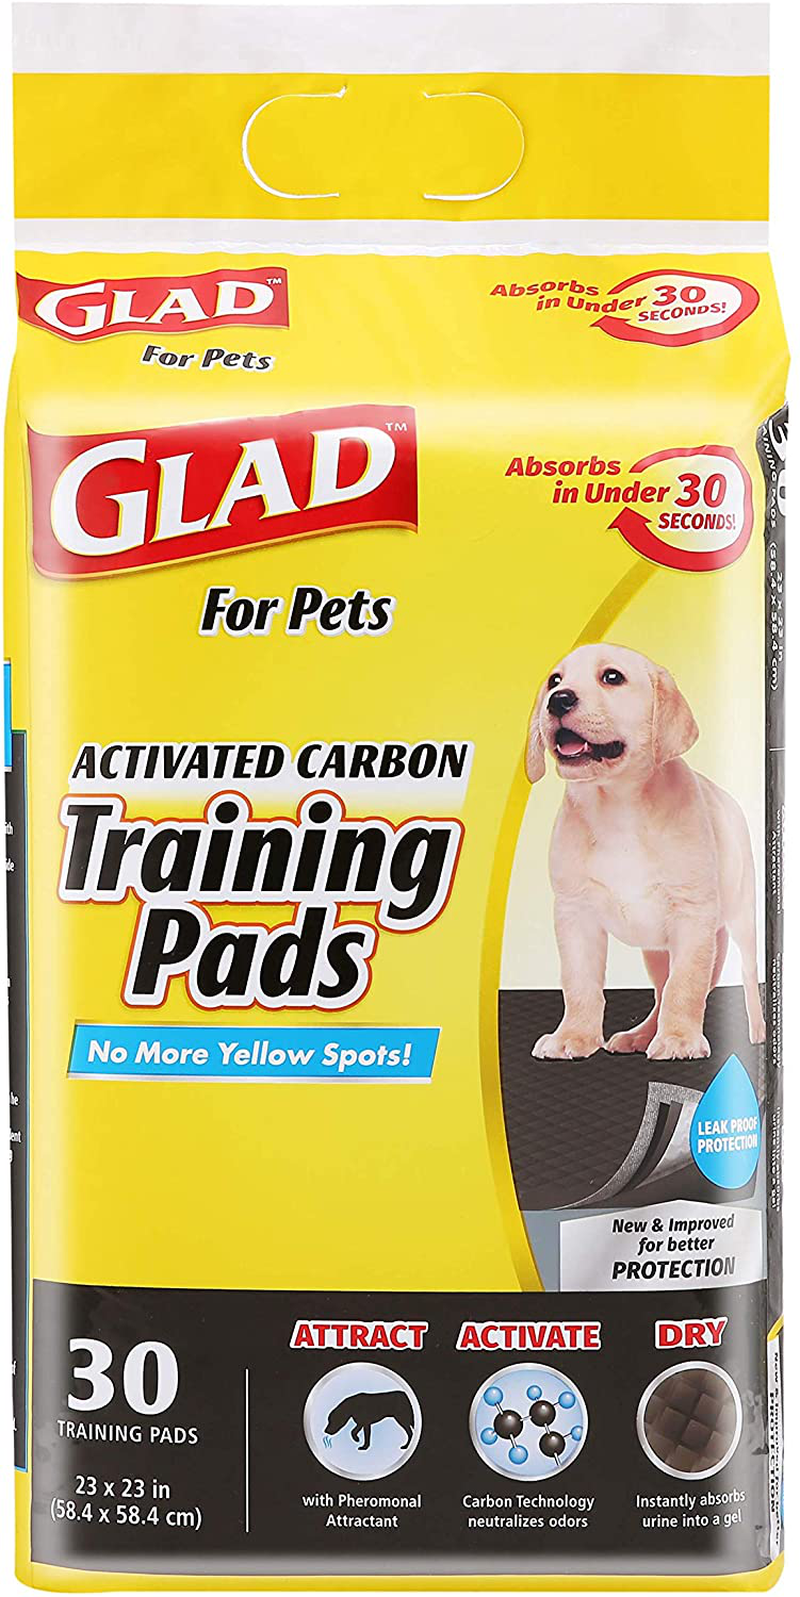 Glad for Pets Black Charcoal Puppy Pads-New & Improved Puppy Potty Training Pads That ABSORB & NEUTRALIZE Urine Instantly-Training Pads for Dogs, Dog Pee Pads, Pee Pads for Dogs, Dog Crate Pads